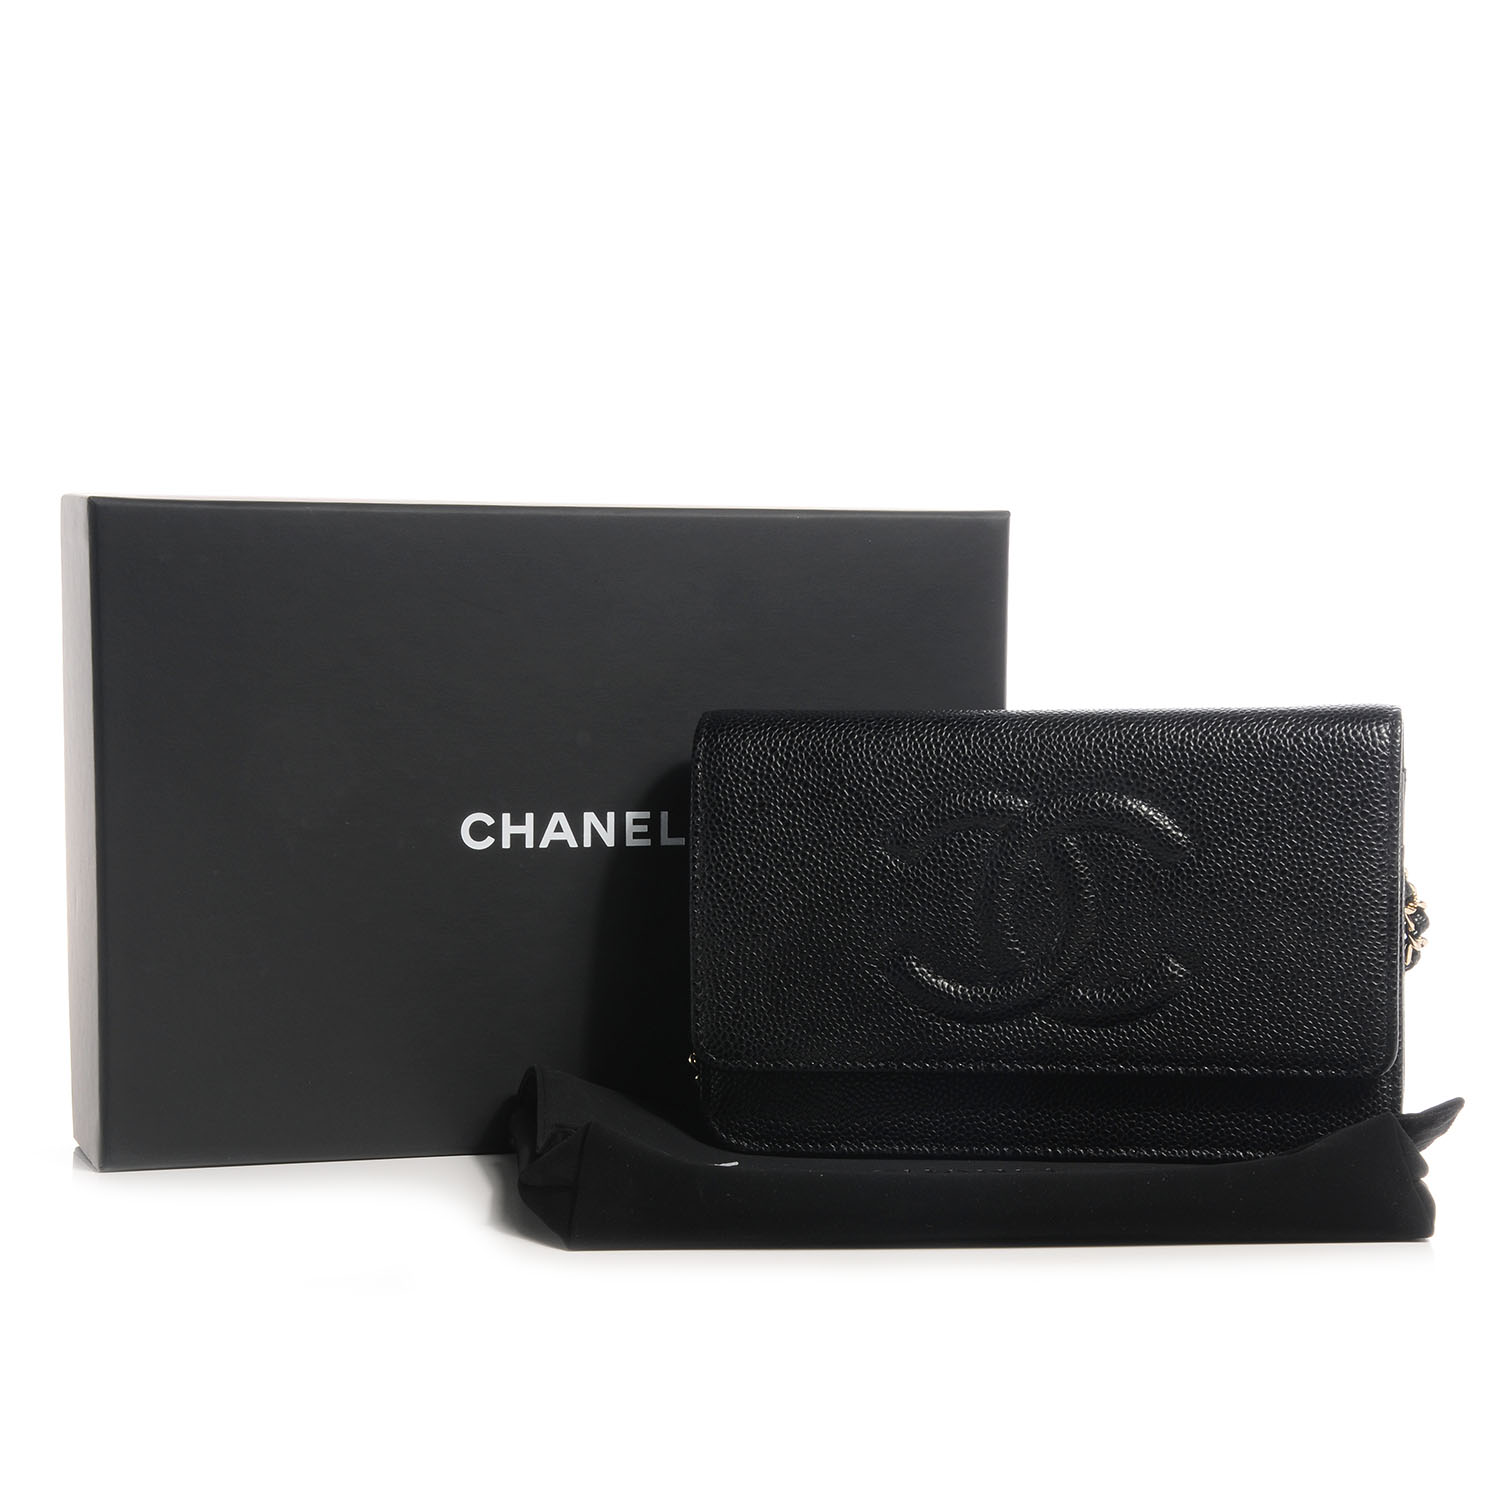 CHANEL Caviar Timeless Wallet on Chain WOC Black 65509